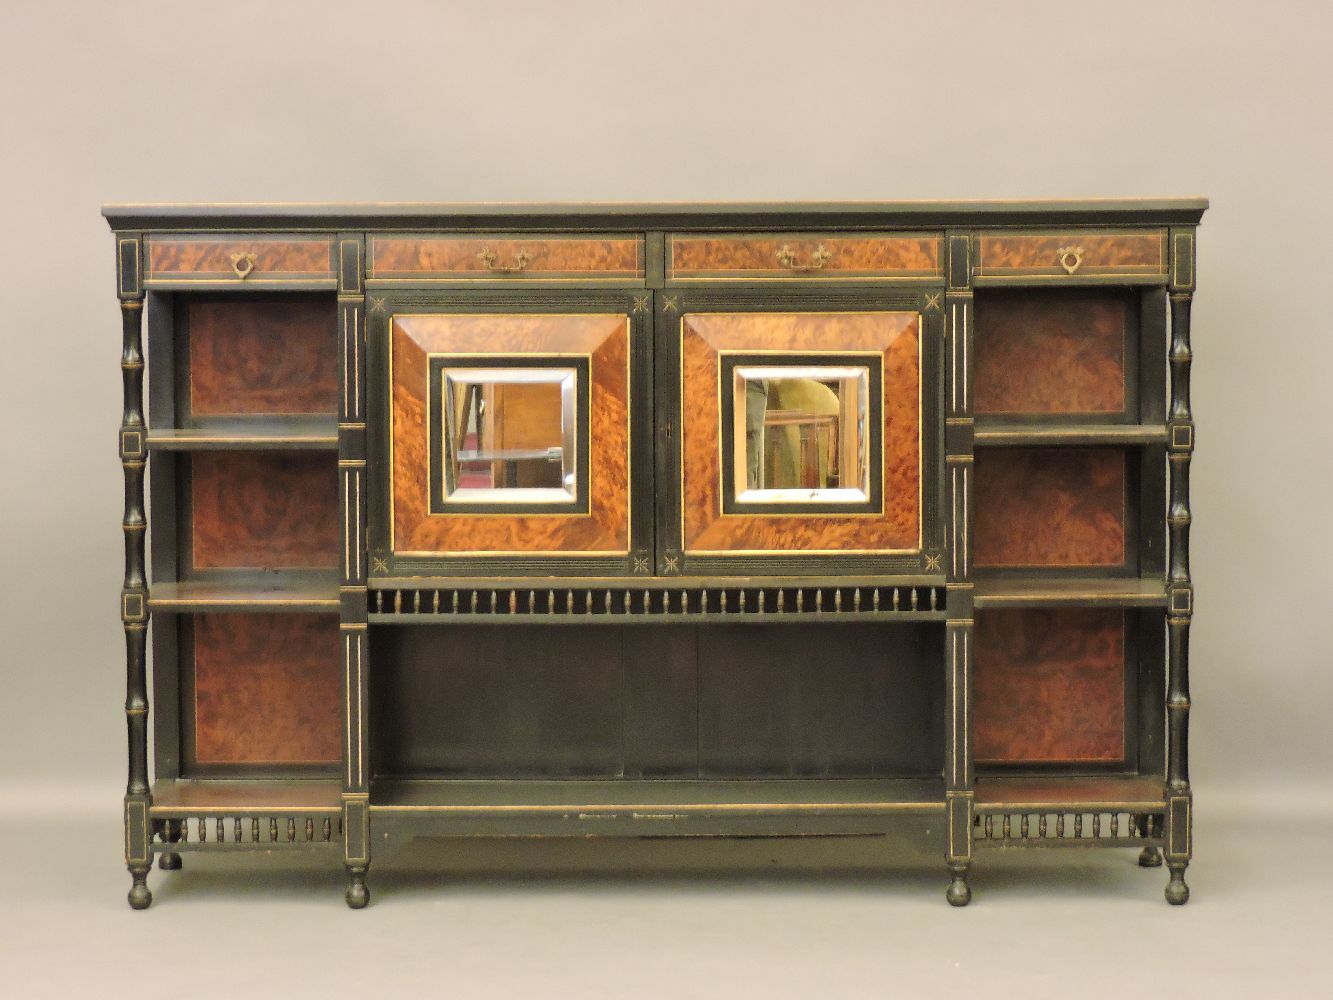 A Victorian Aesthetic burr walnut and ebonised side cabinet, with mirrored doors, four drawers and